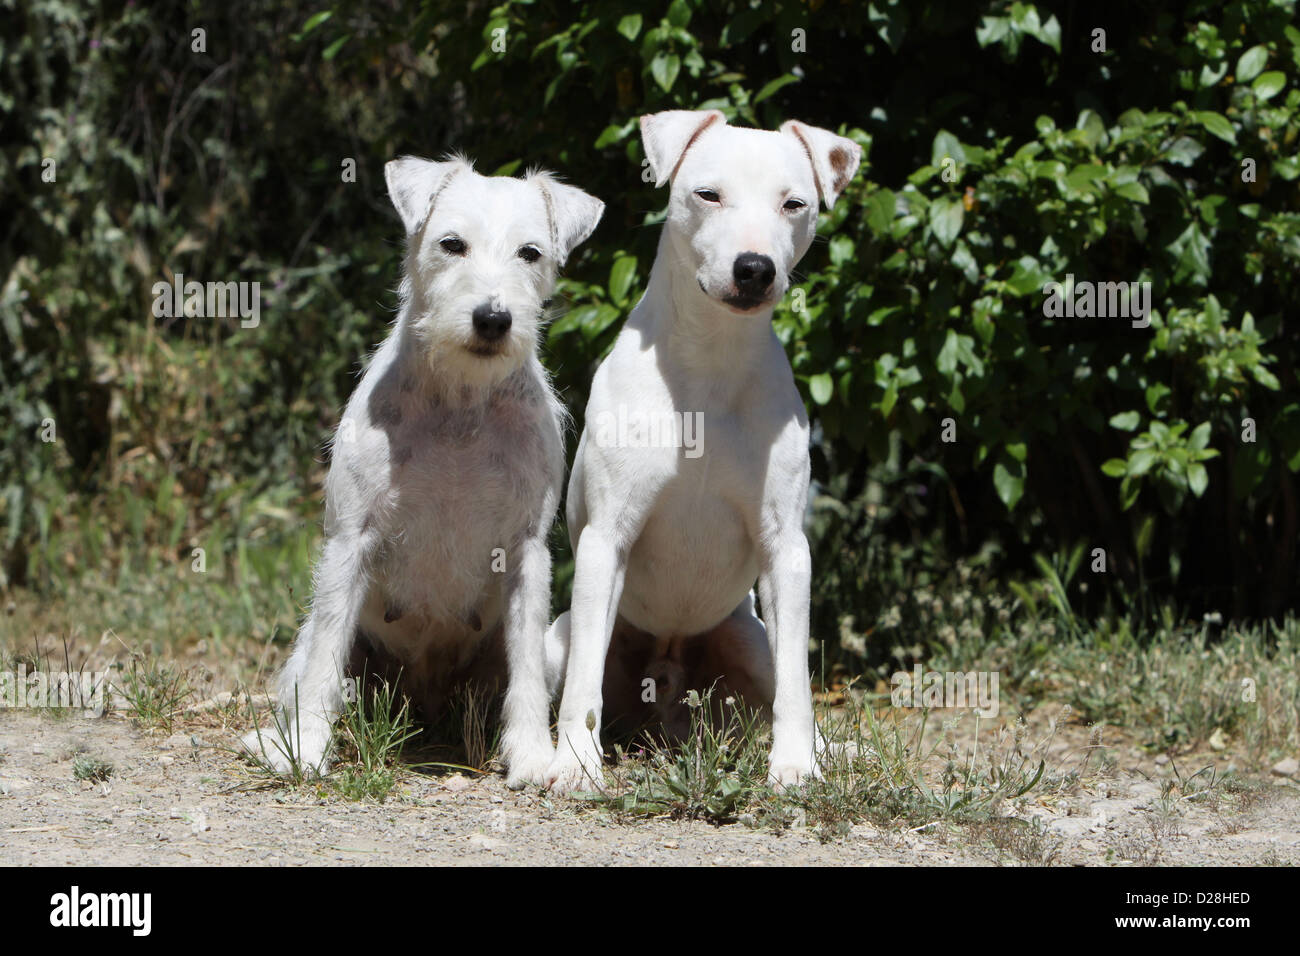 Dog Parson Russell Terrier Two Adults White Different Variety Stock Photo Alamy